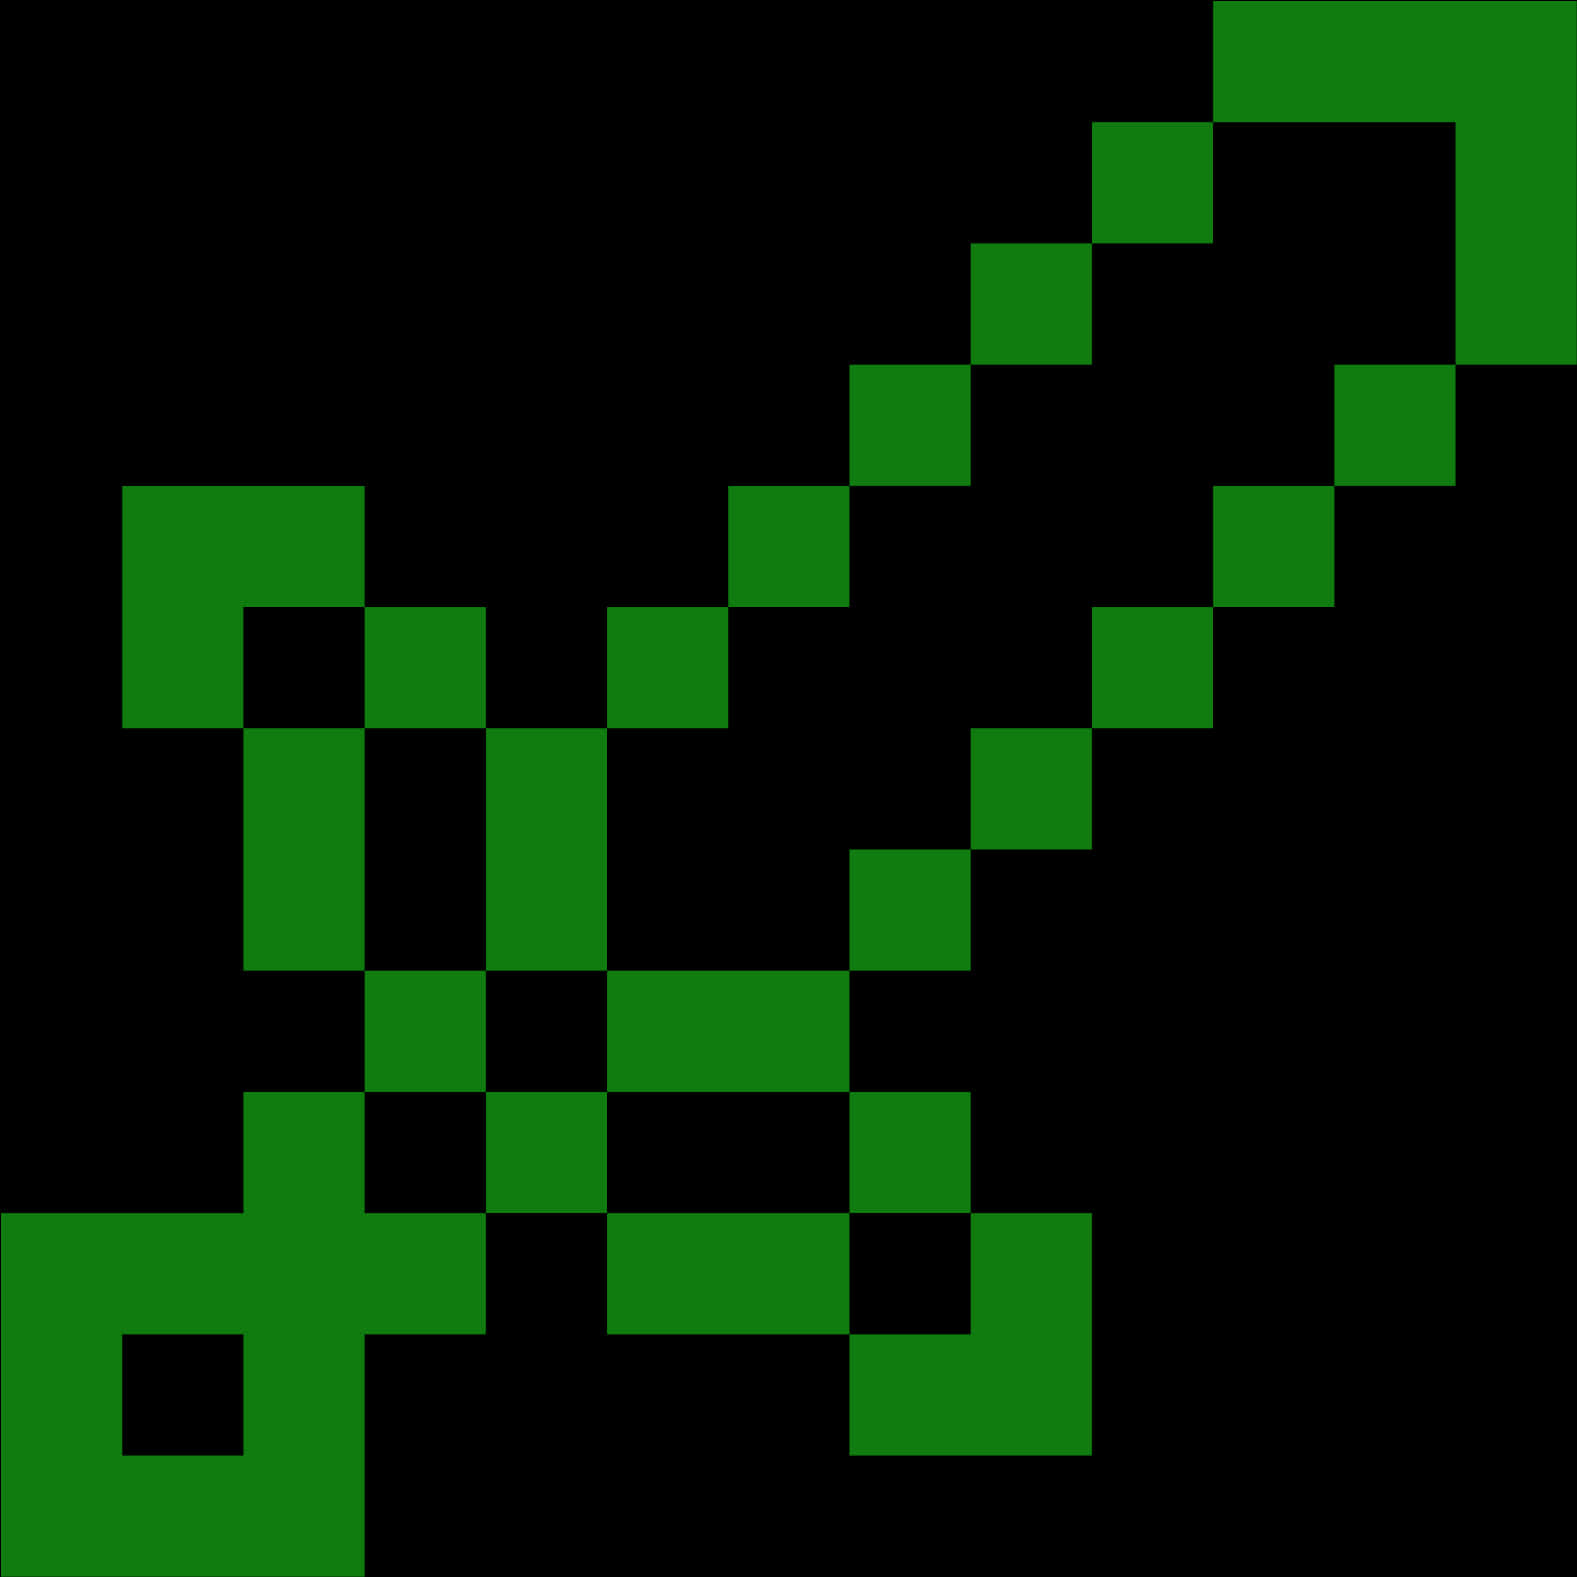 A Pixelated Sword With Black Squares